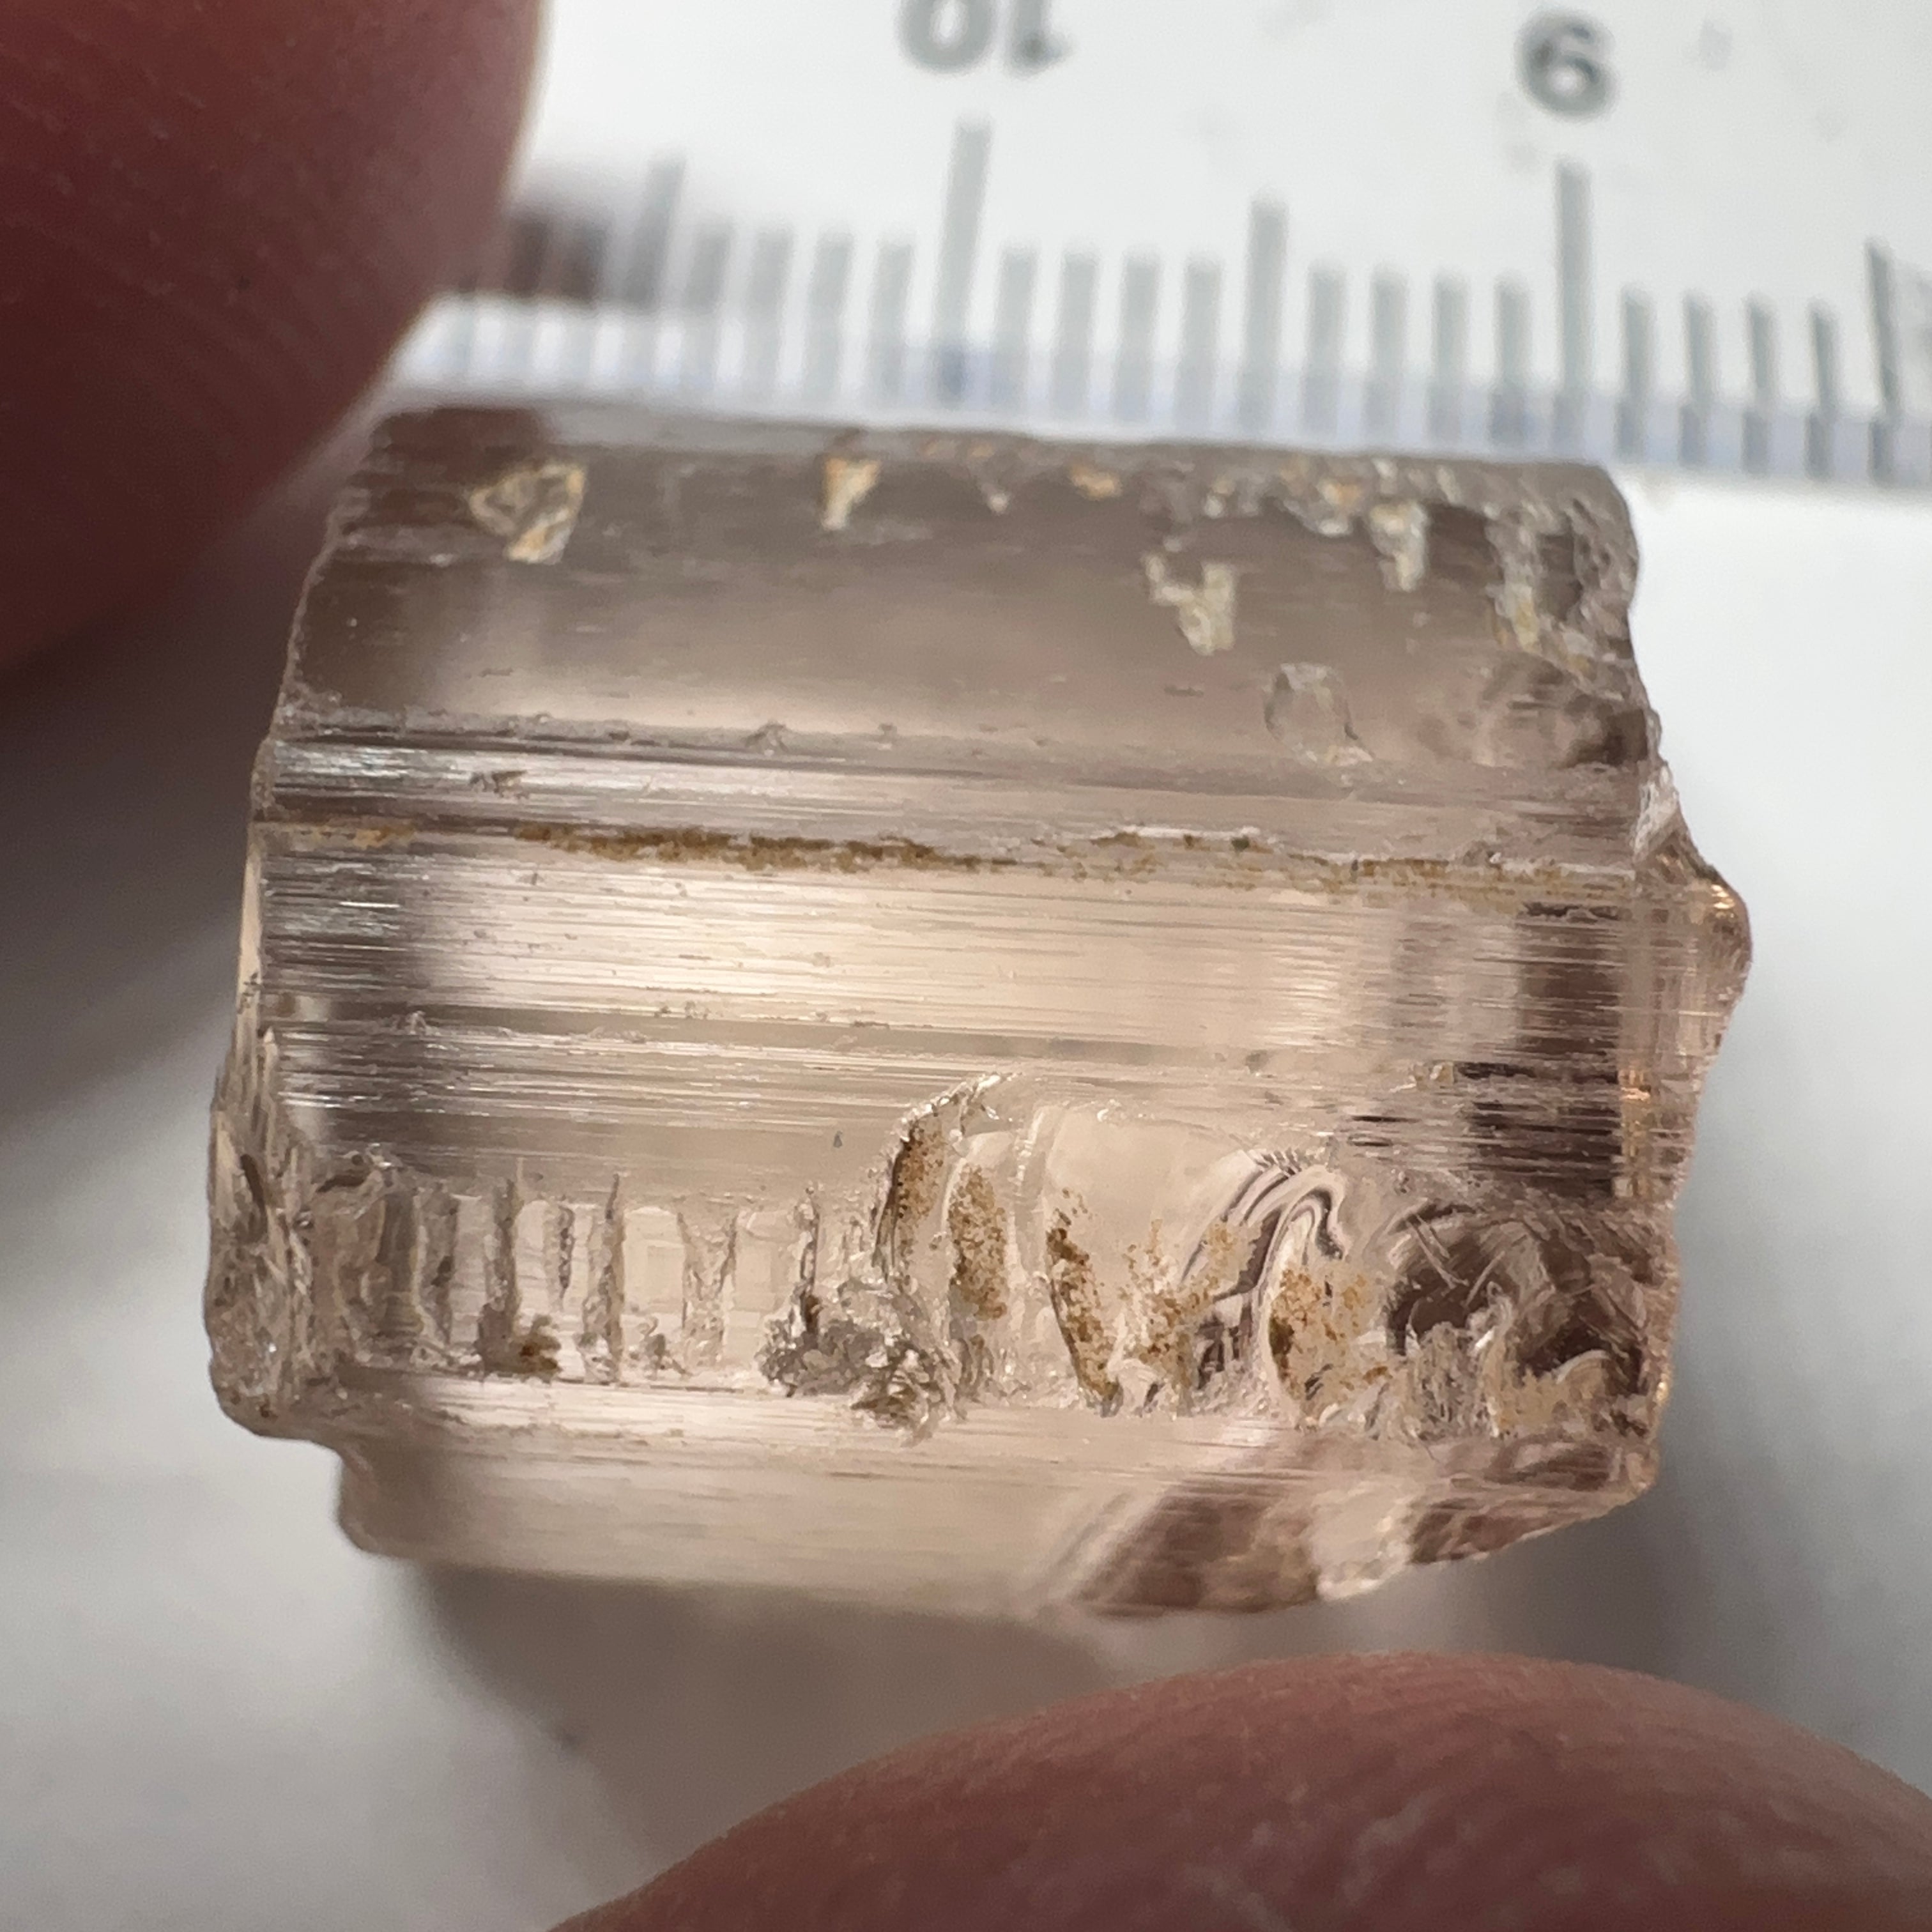 21.31ct Very Rare, Peach Pink Scapolite, Tanzania, Untreated Unheated, VVS-IF (flawless)